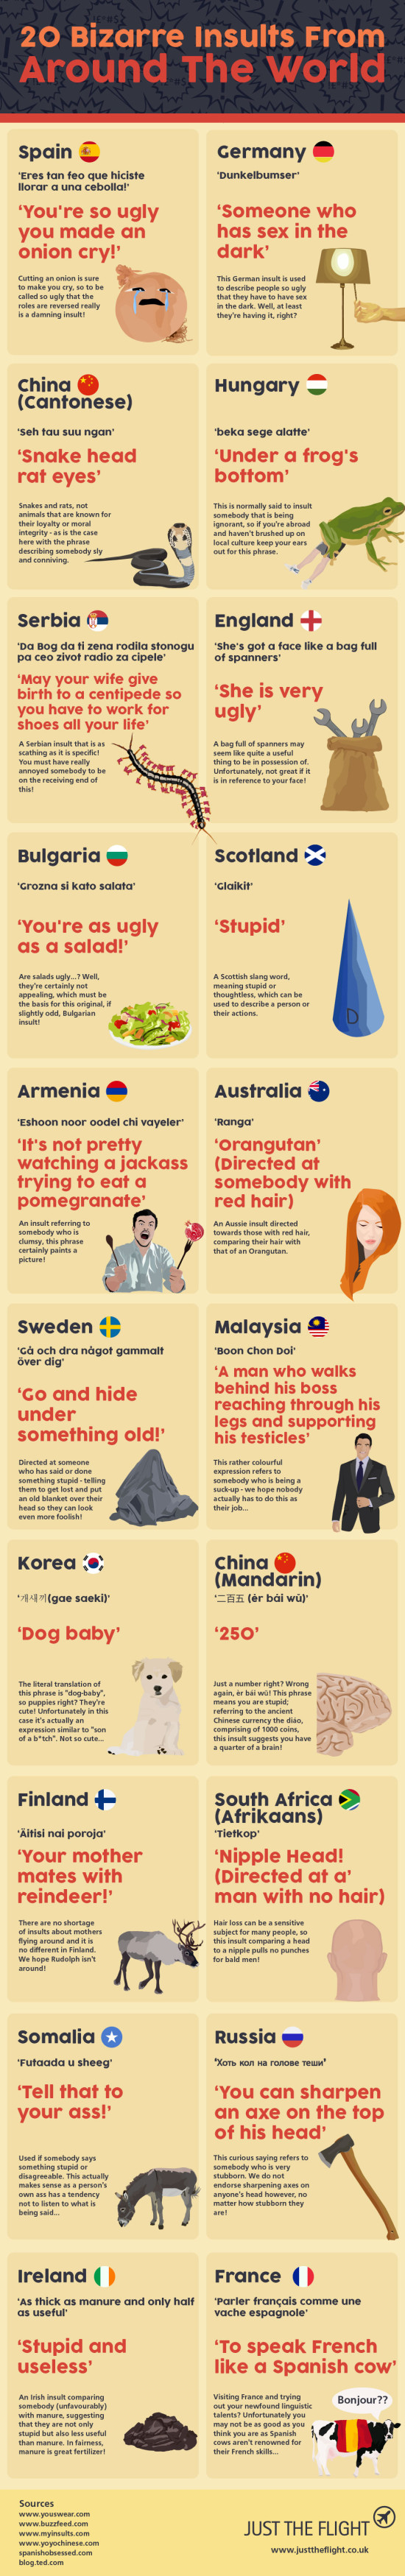 infographics-bizarre-insults